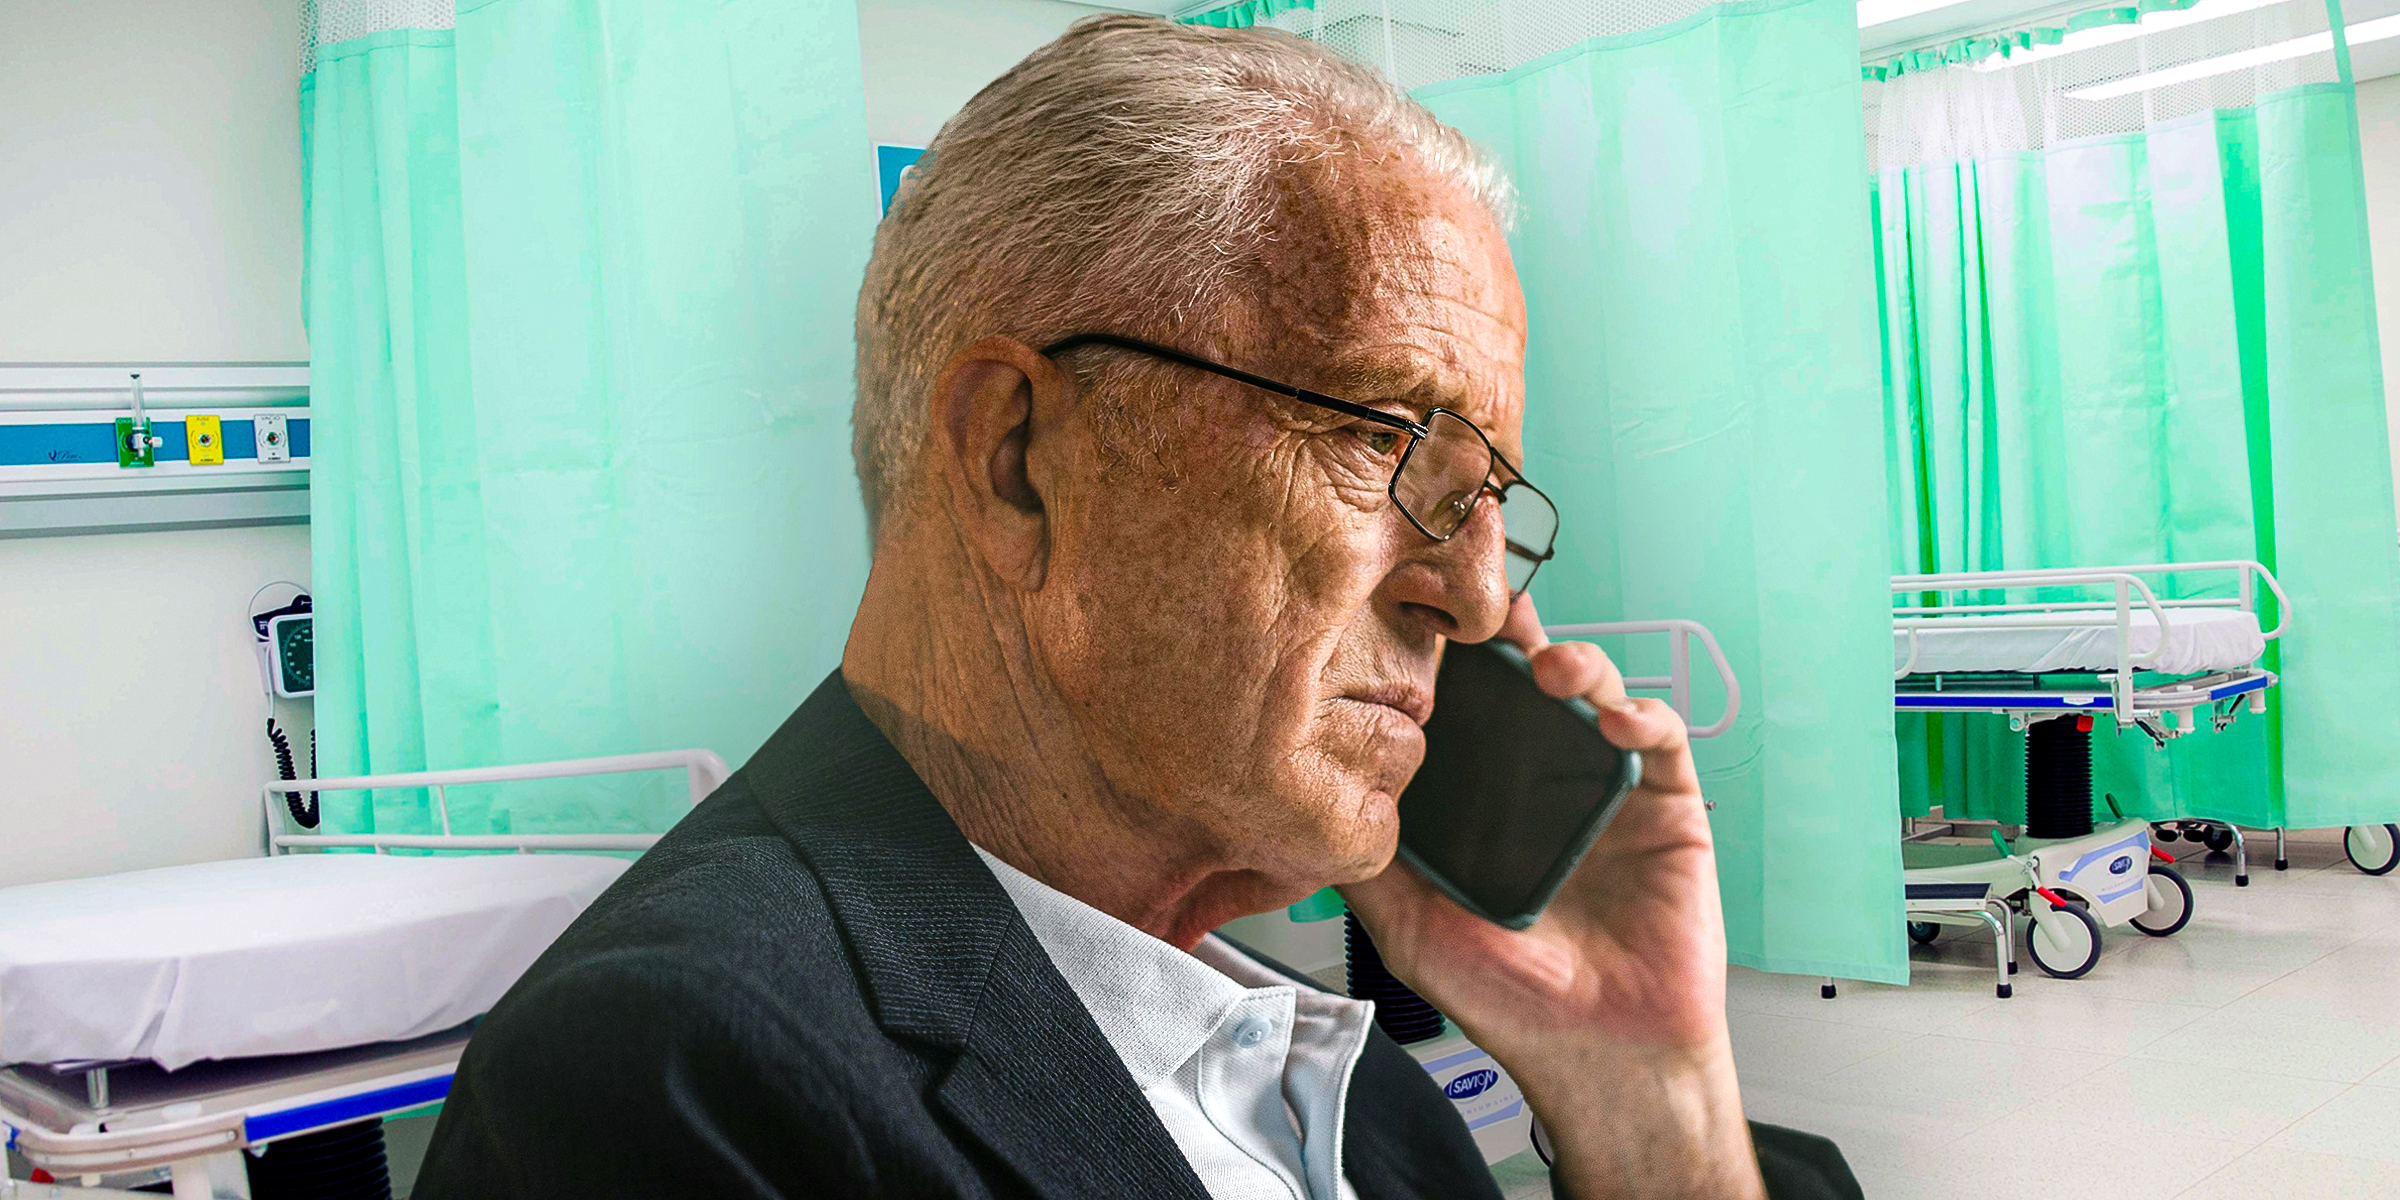 An elderly man in the hospital making a phone call | Source: Pexels